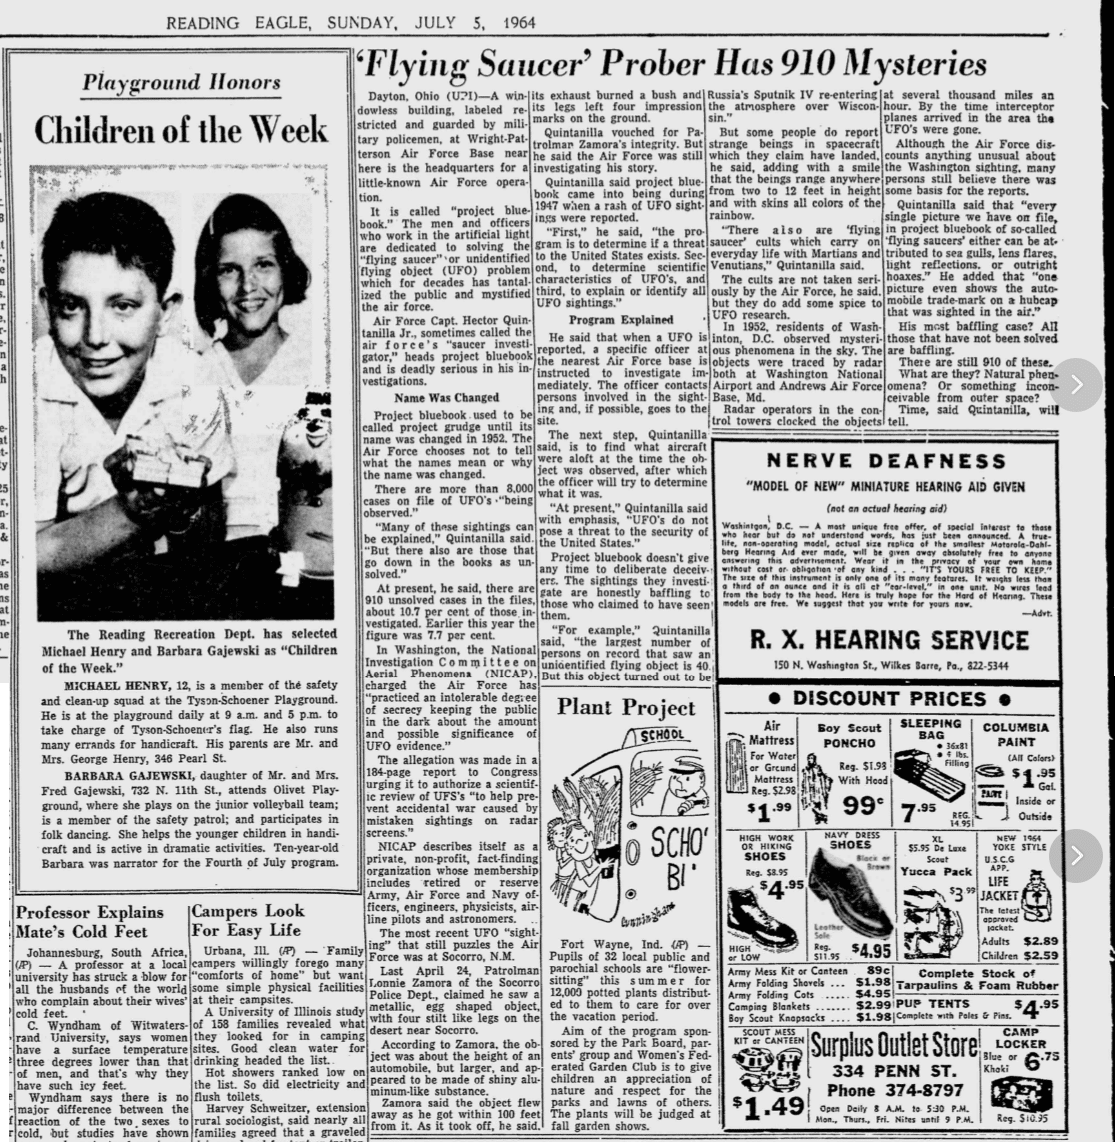 Article in the Reading Eagle, July 1964, about UFO sighting investigations by Project Blue Book from the MyHeritage newspaper collection 